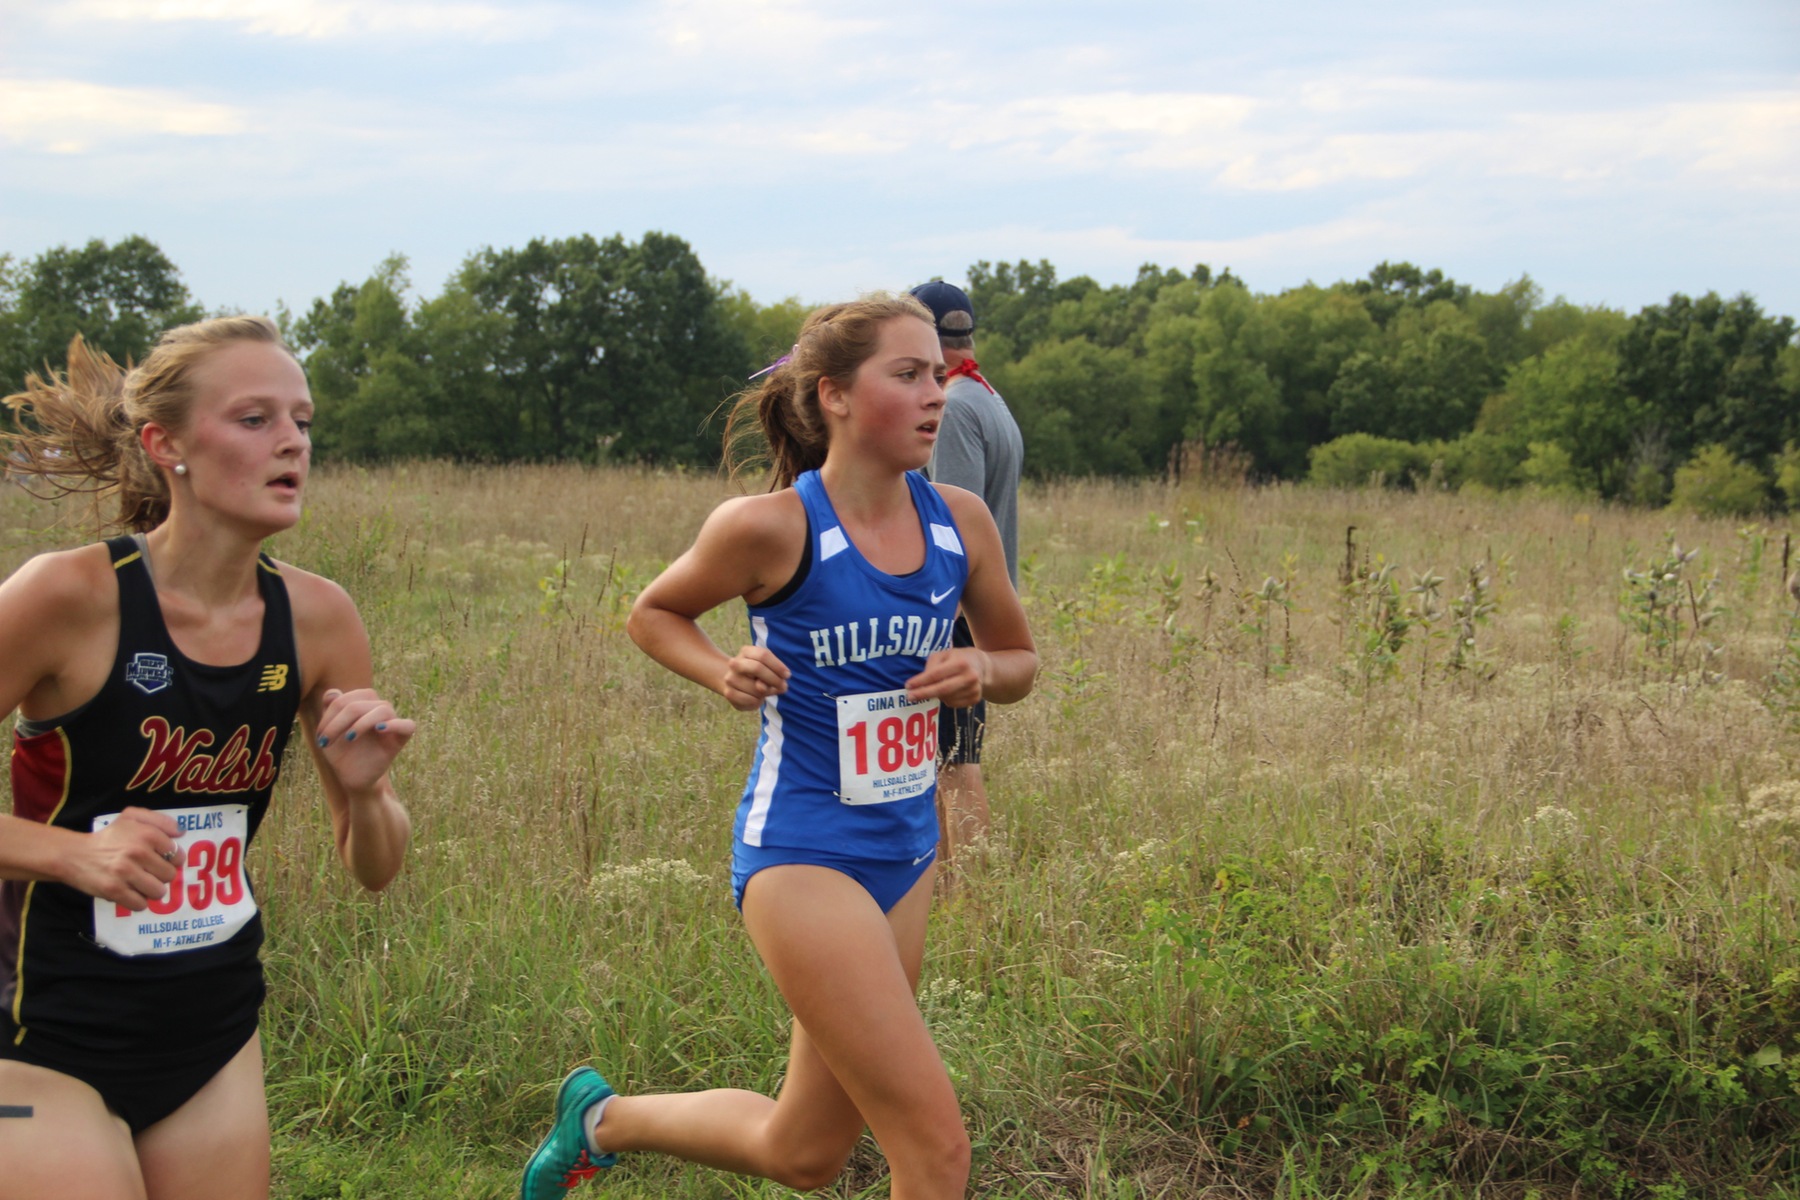 Charger cross country teams return to action in Tiffelberg Invite this Friday